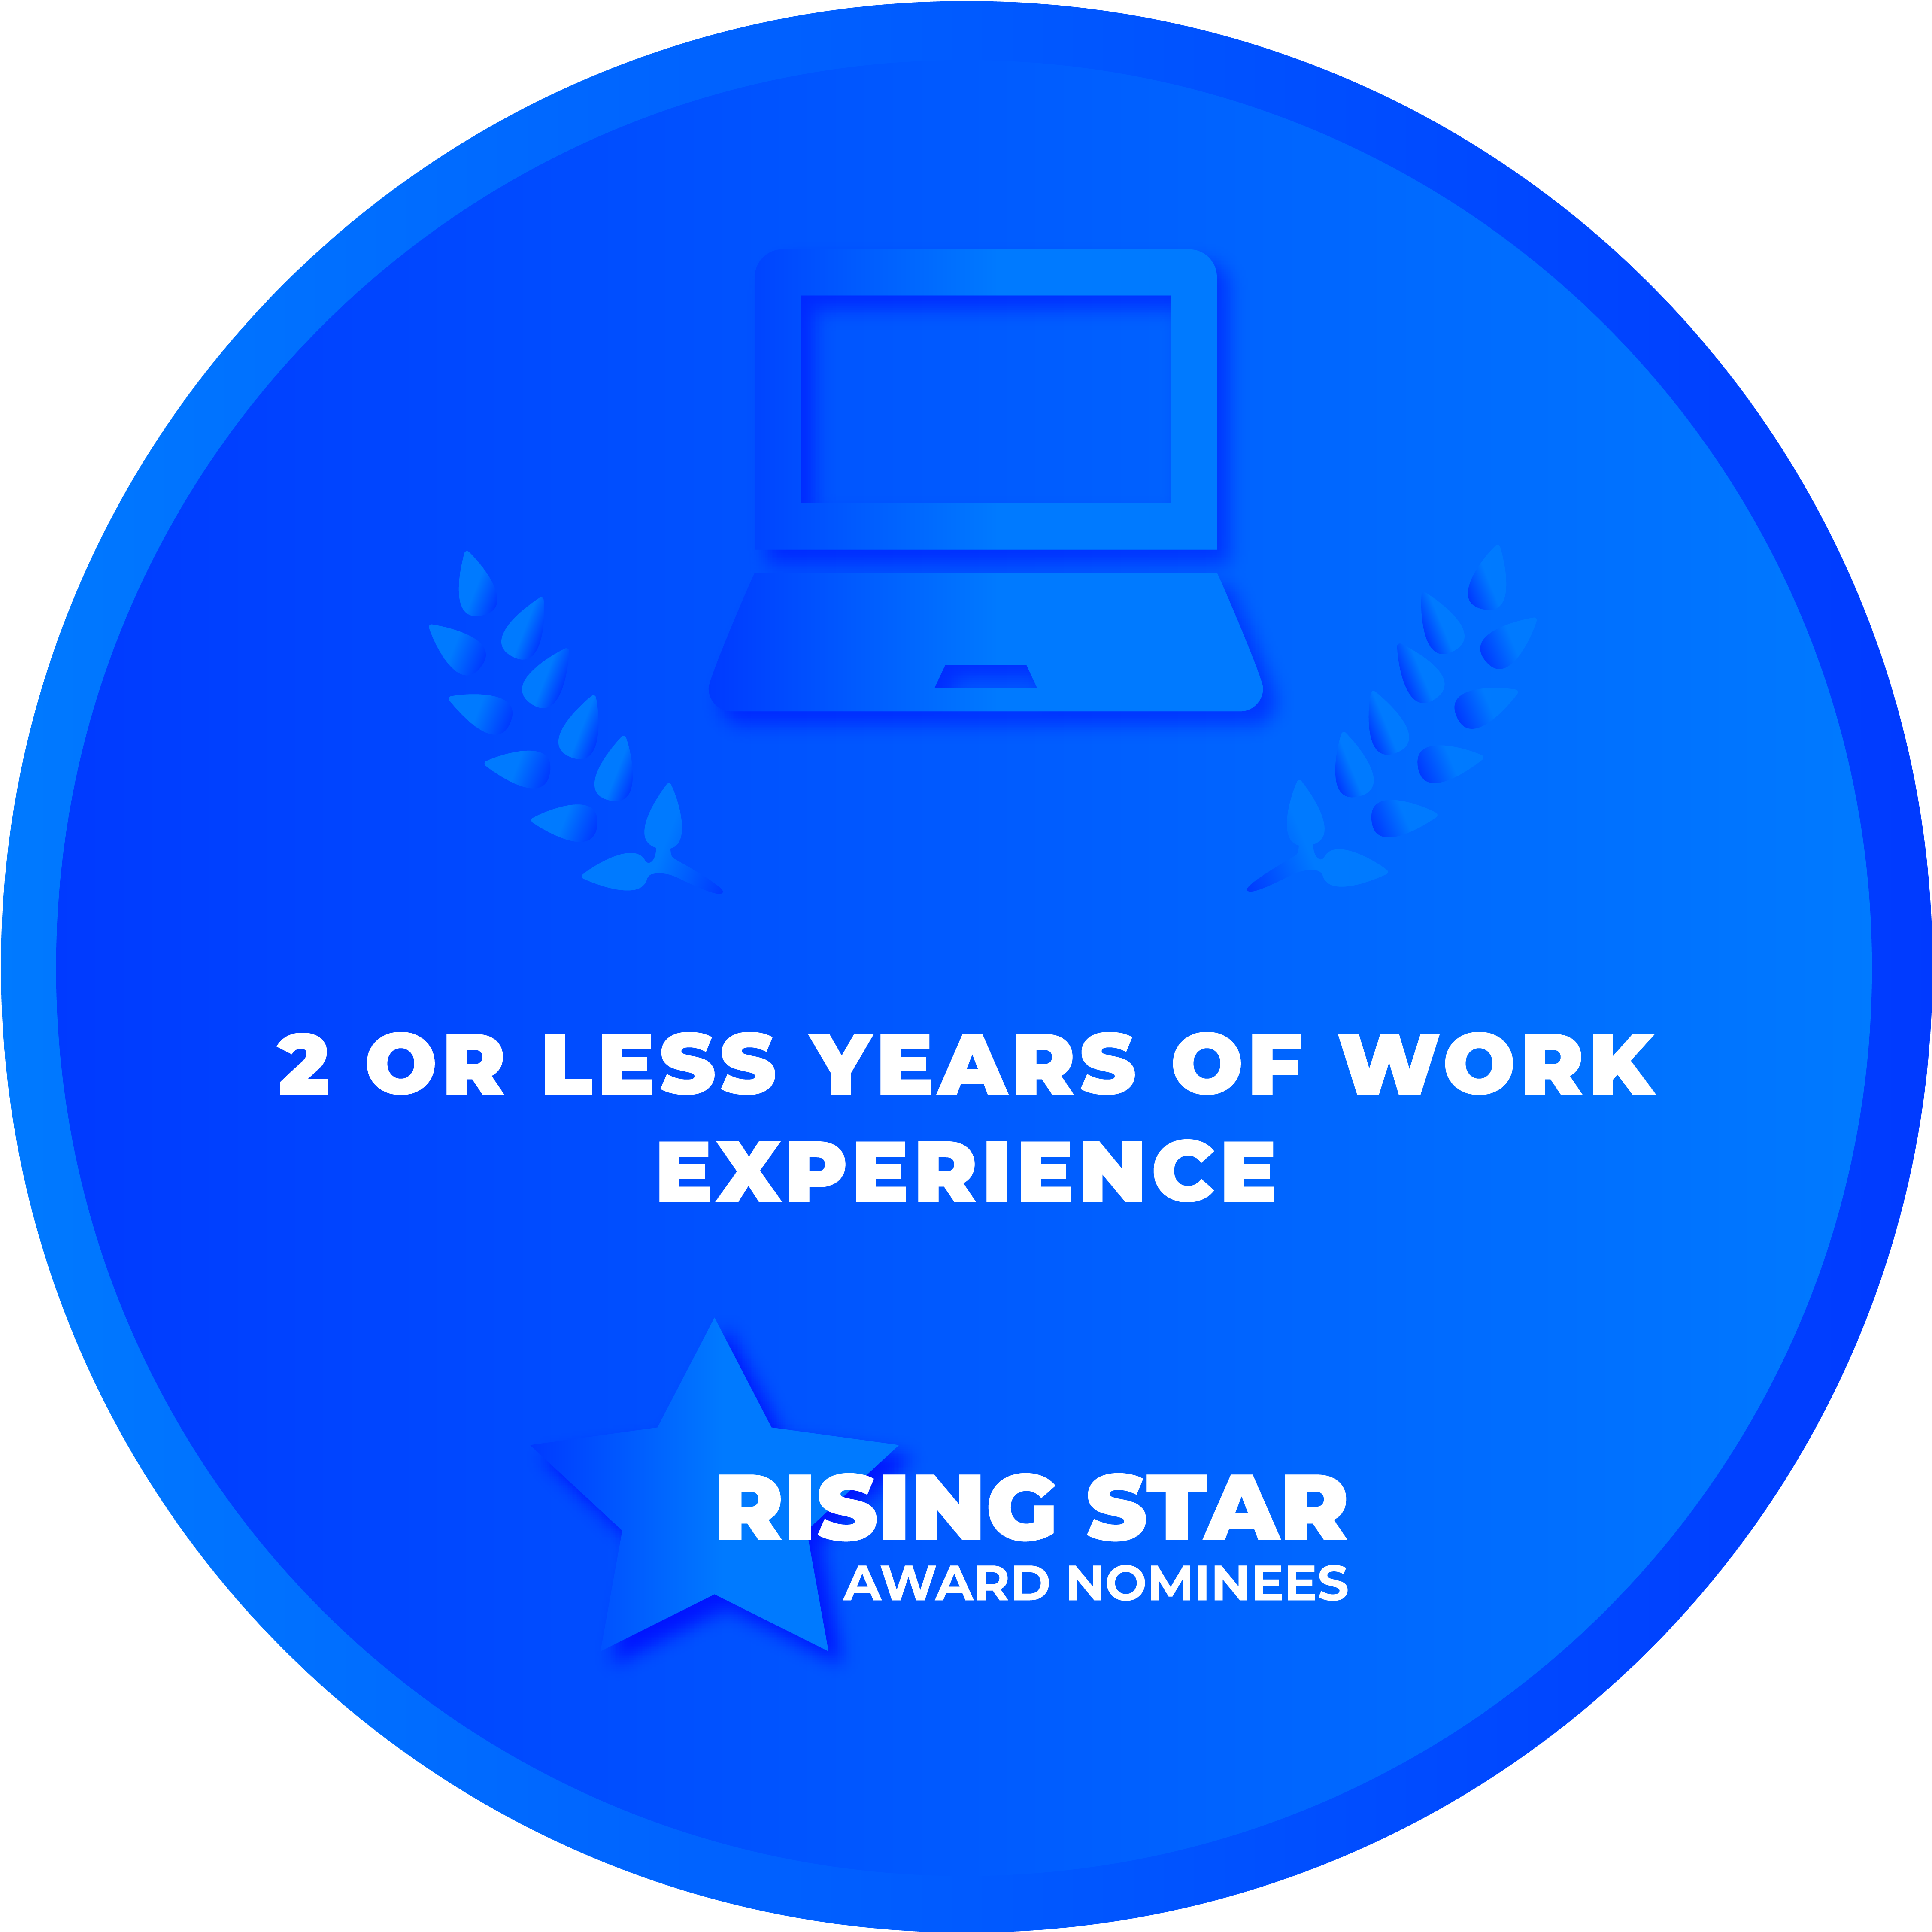 CRCA 2022 - RISING STAR AWARD - 2 or Less Years of Work Experience